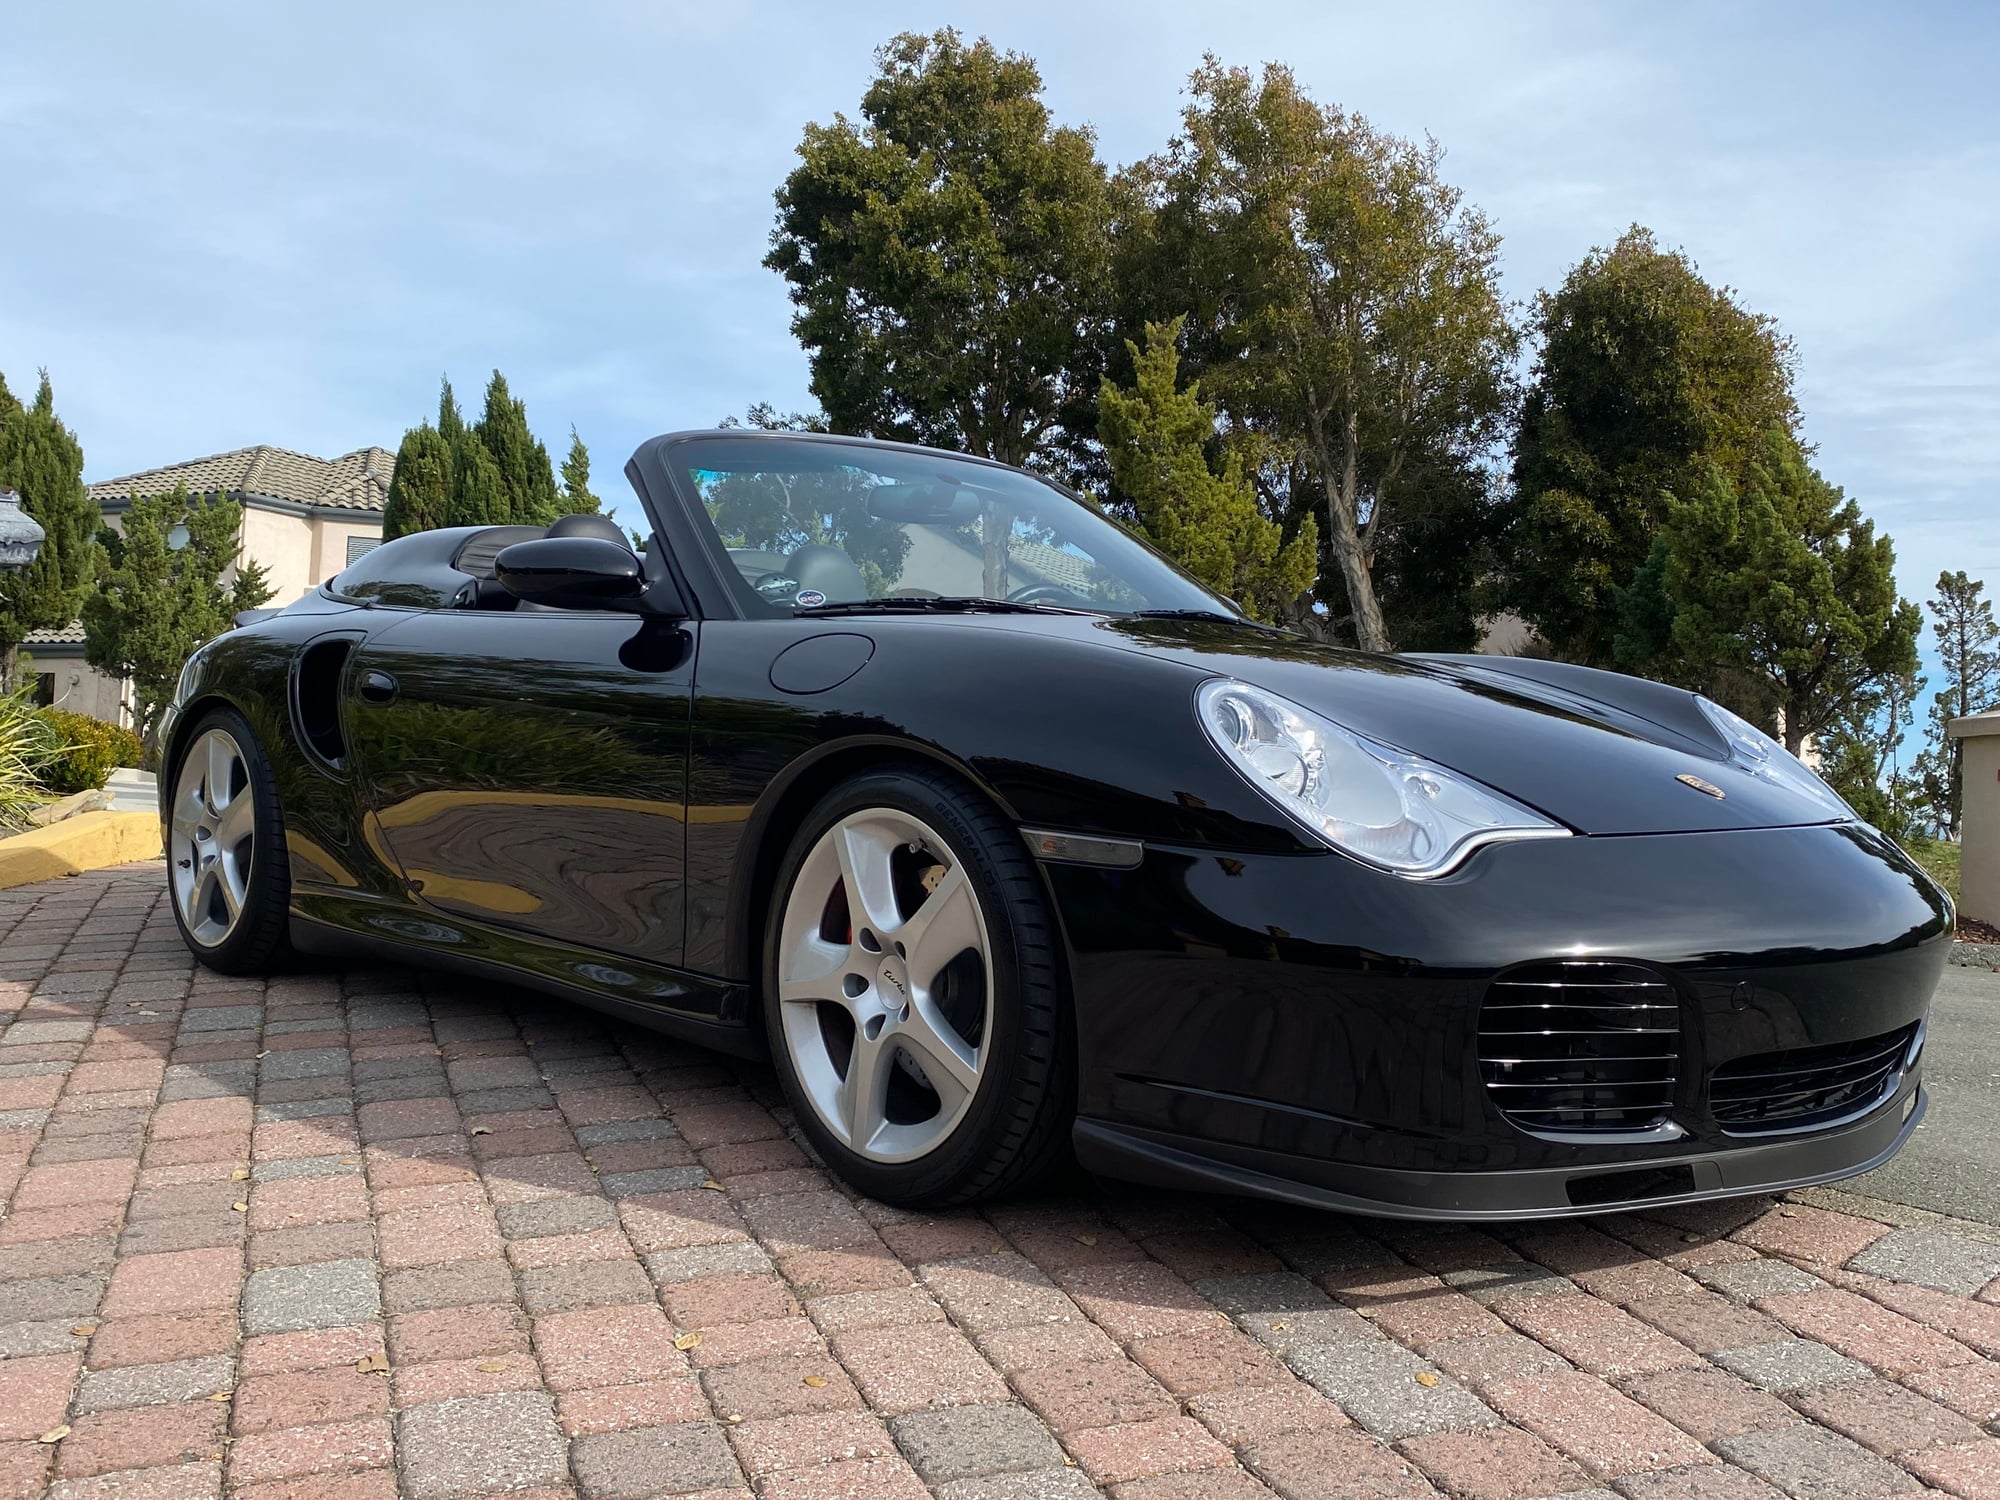 2004 Porsche 911 - Stunning 2004 Porsche 911 turbo cabriolet - Used - VIN wp0cb29994s676672 - 19,500 Miles - 6 cyl - 4WD - Manual - Convertible - Black - Larkspur, CA 94939, United States